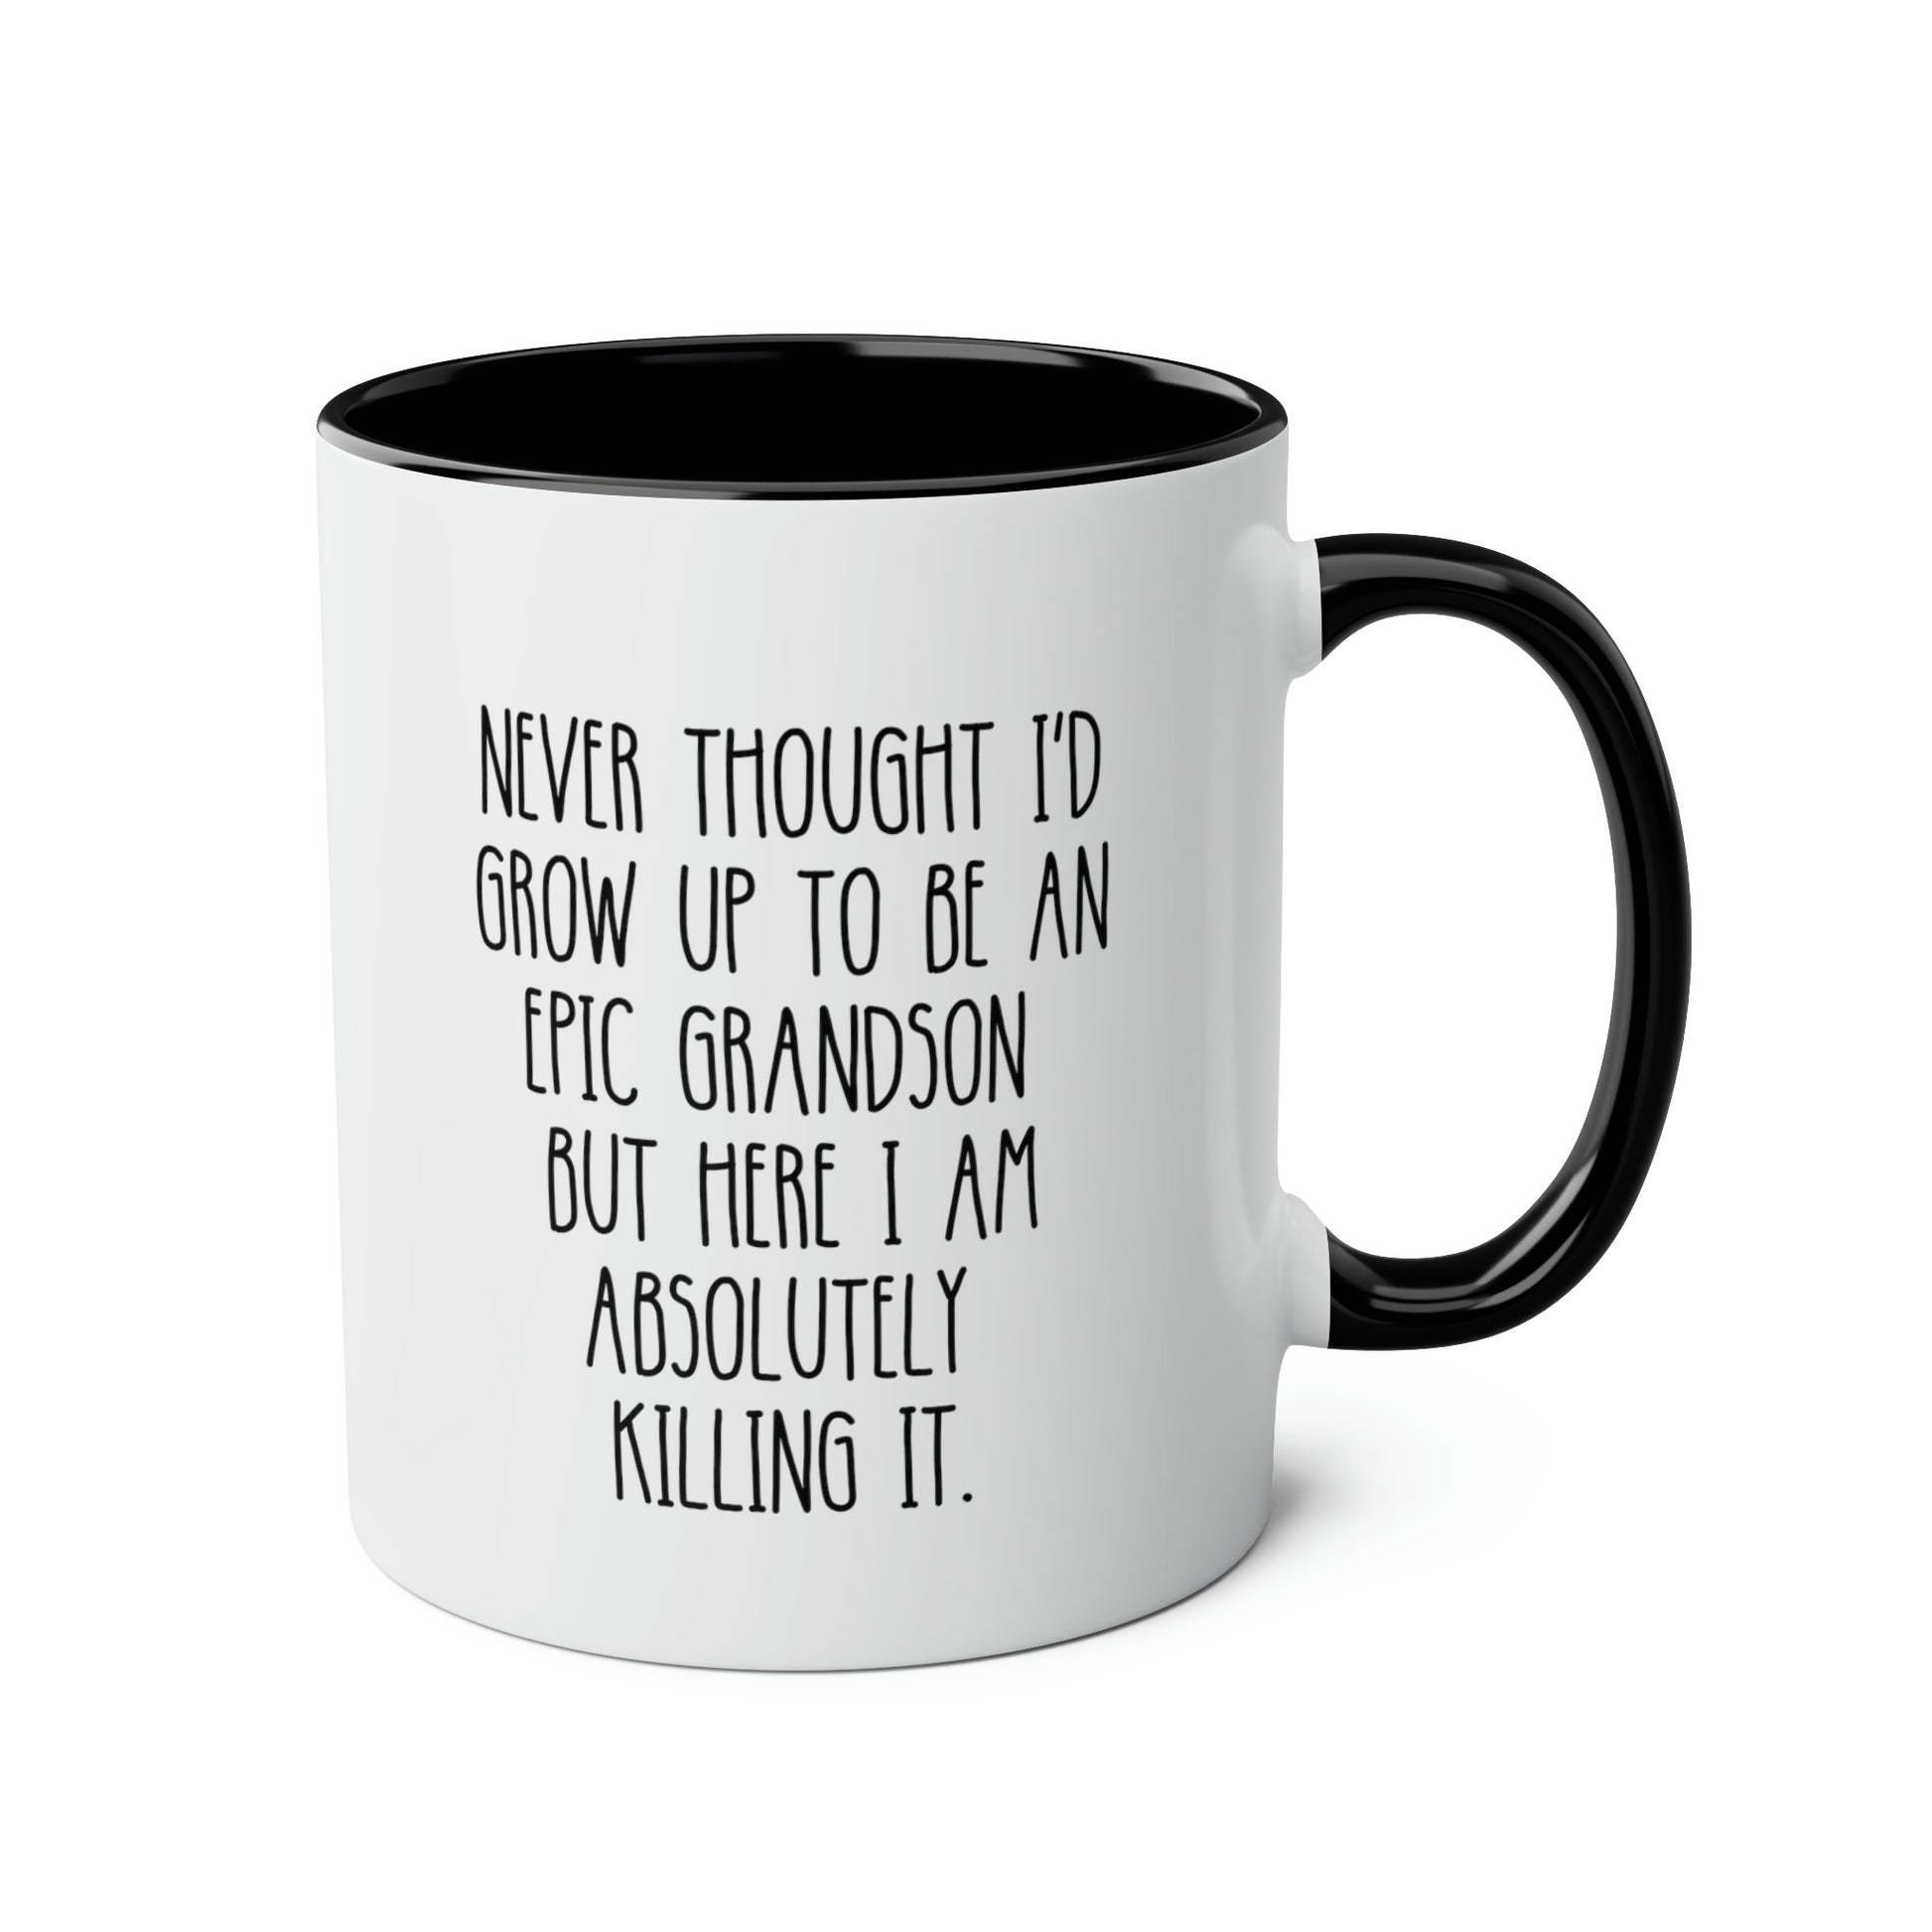 Never Thought I'd Grow Up To Be An Epic Grandson But Here I Am Absolutely Killing It 11oz white with black accent funny large coffee mug gift for grandparent waveywares wavey wares wavywares wavy wares